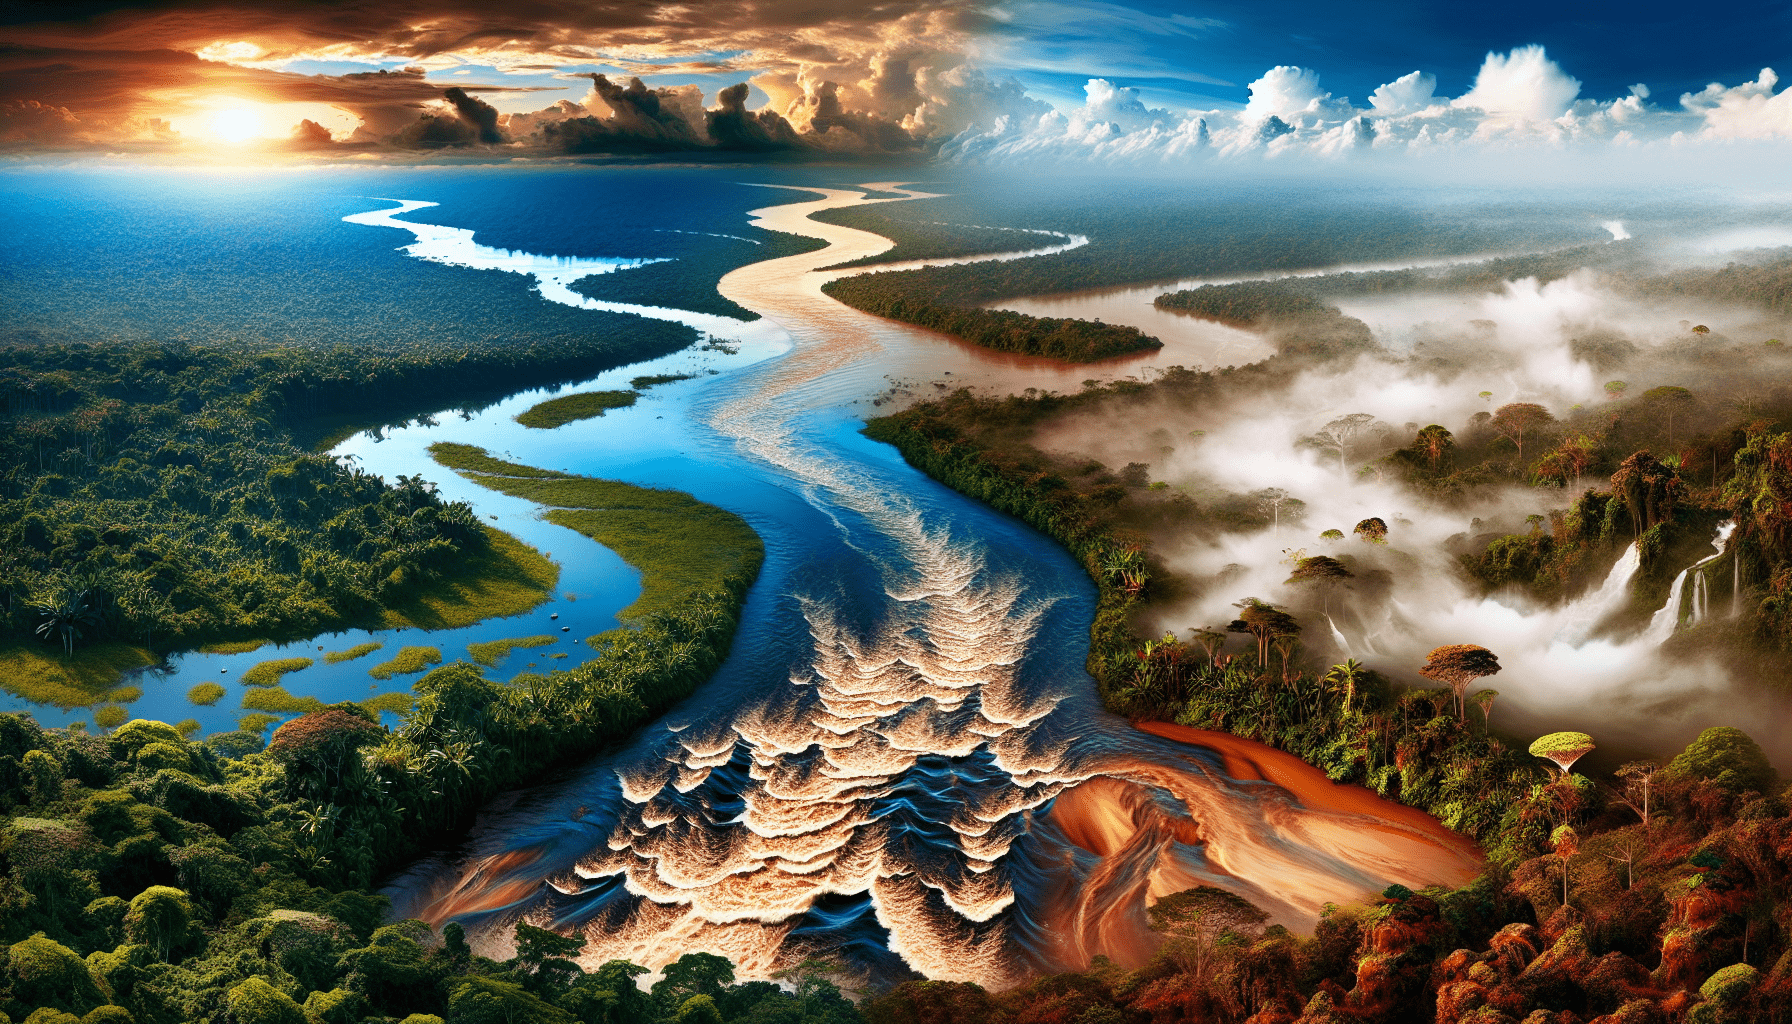 Does The Amazon River Have Clean Water?